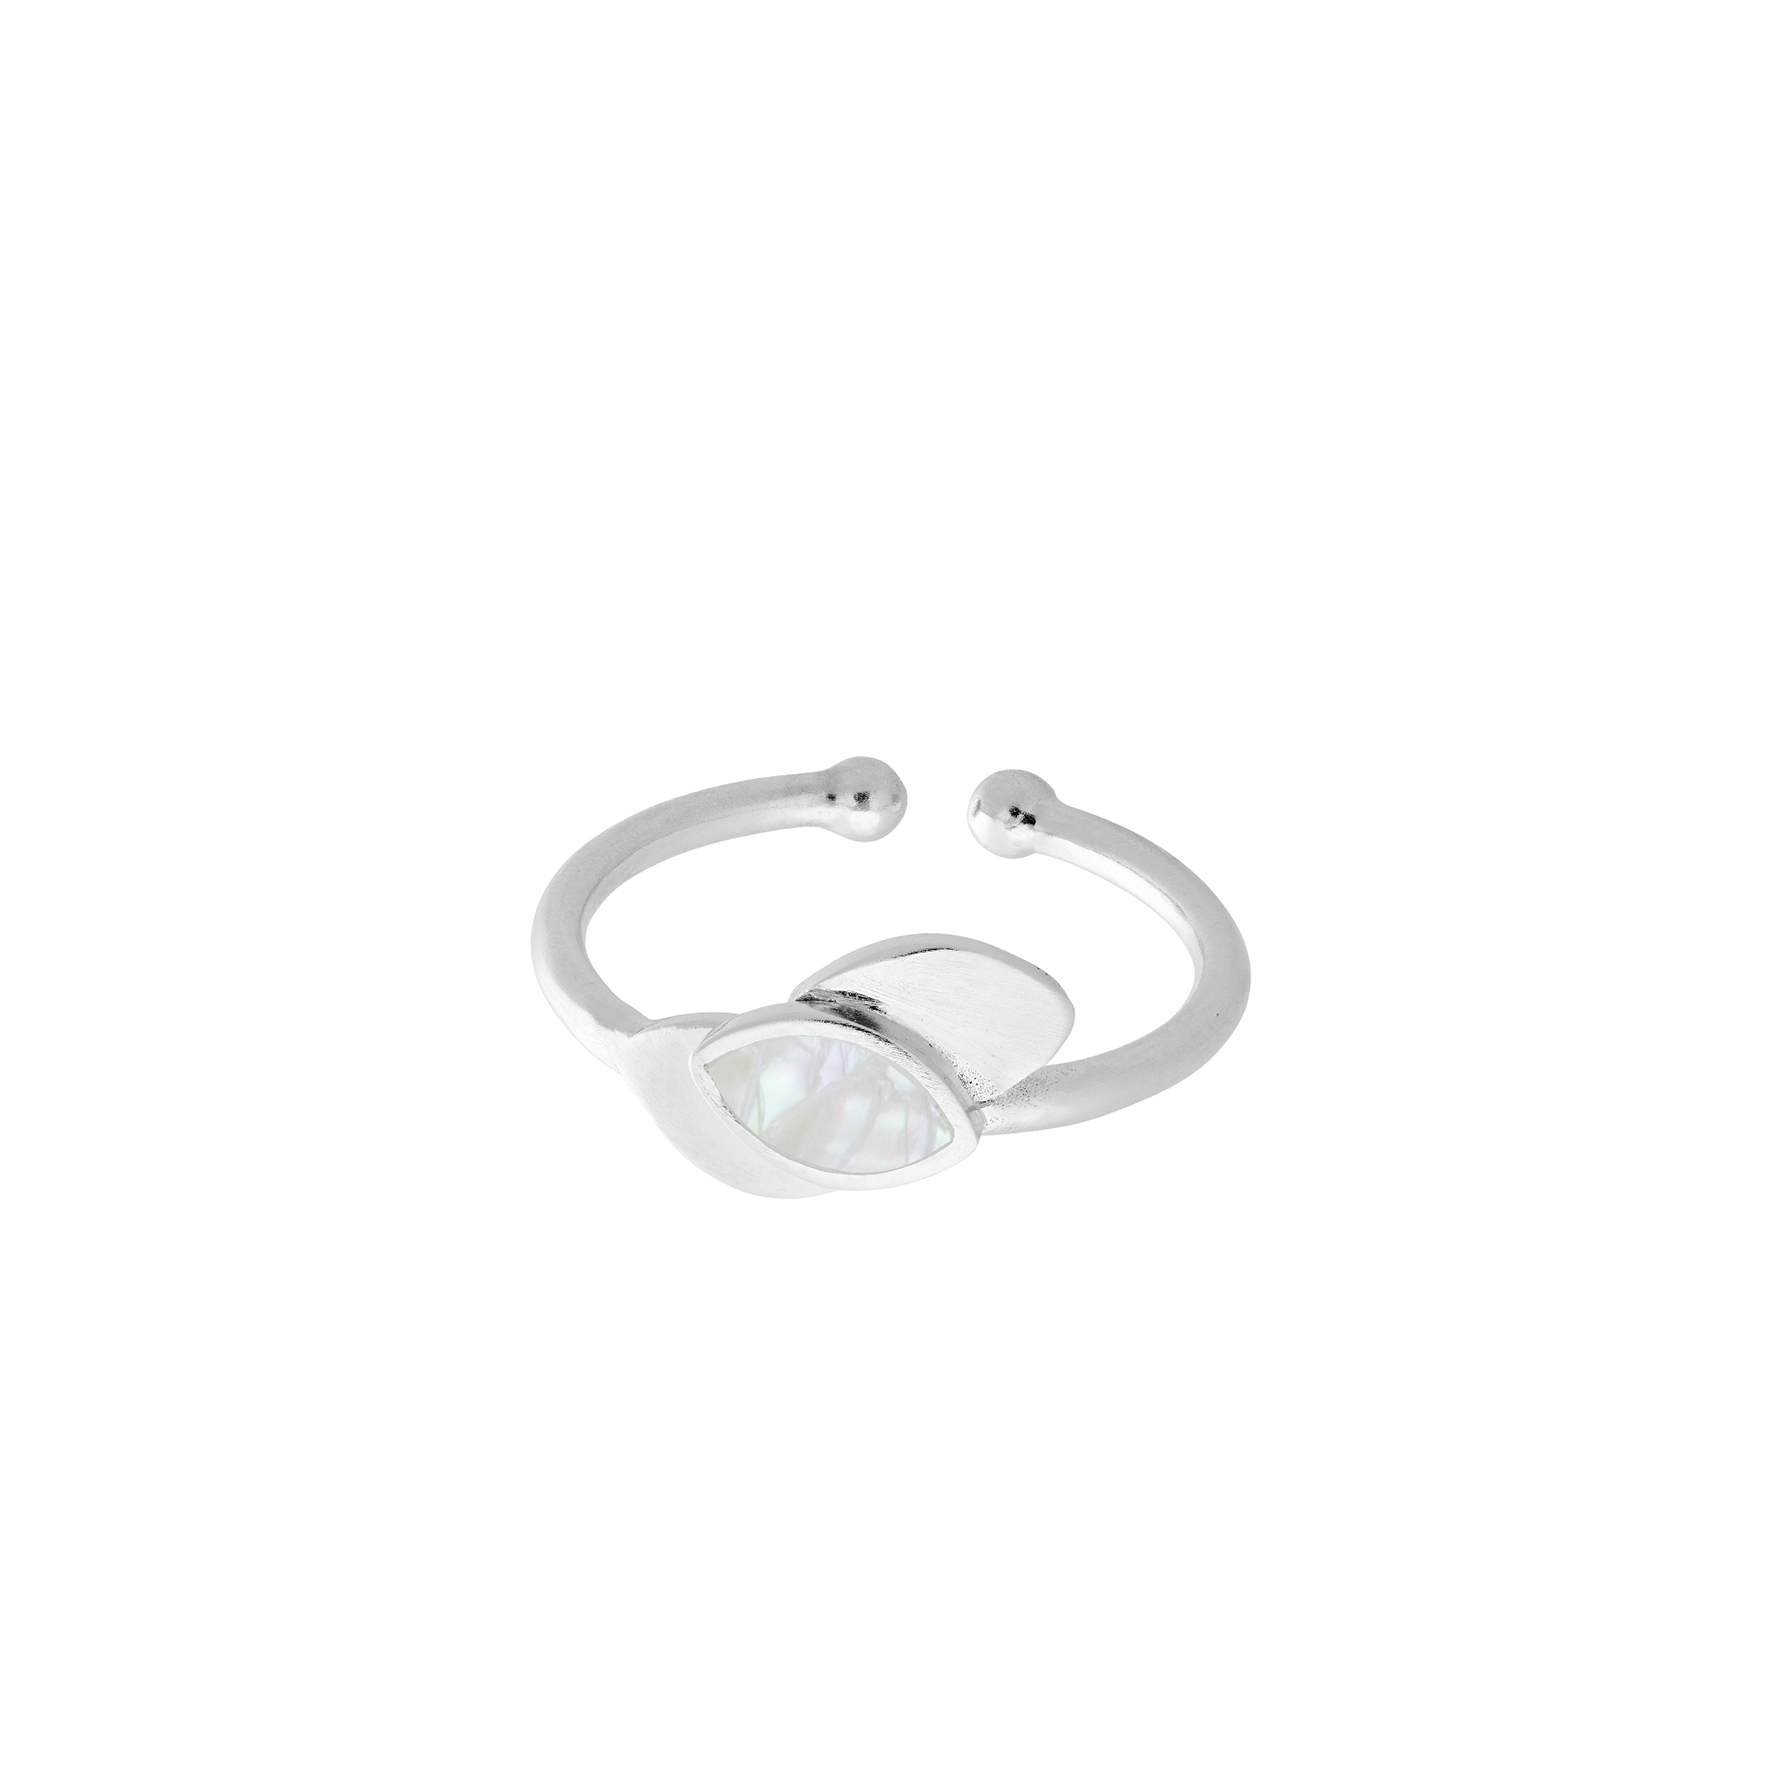 Flake Ring from Pernille Corydon in Silver Sterling 925